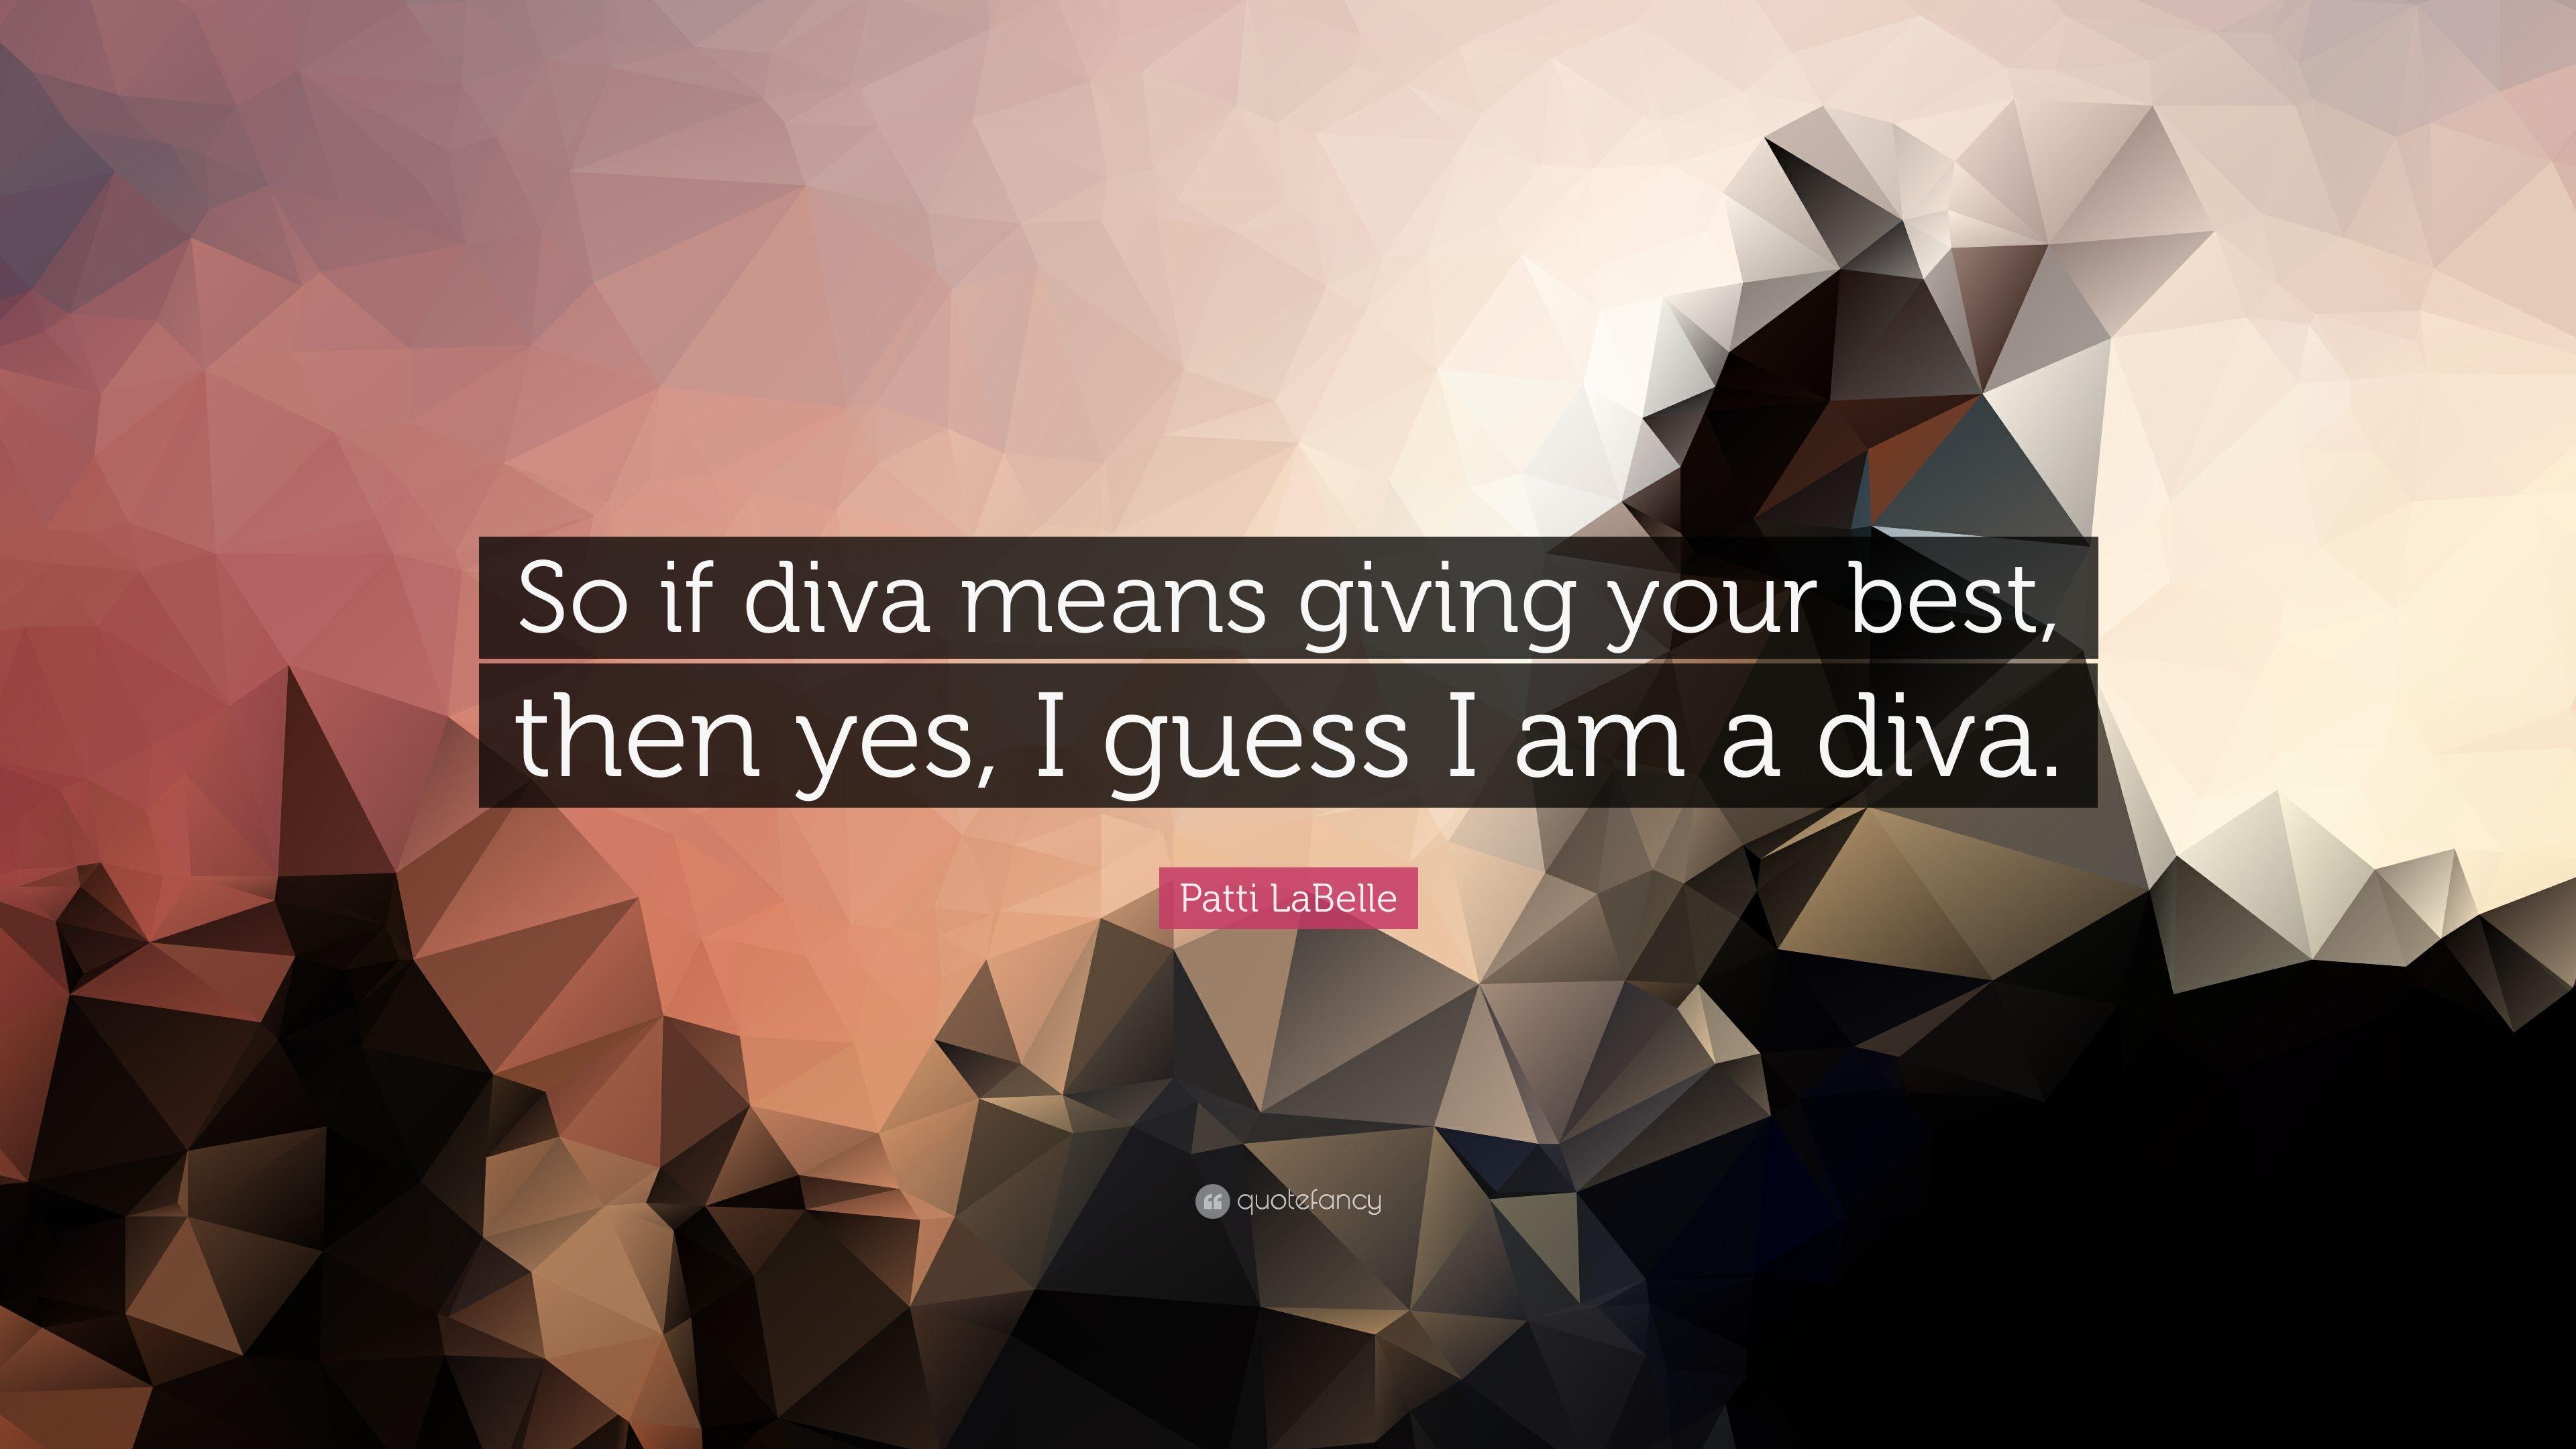 Patti LaBelle Quote: “So if diva means giving your best, then yes, I